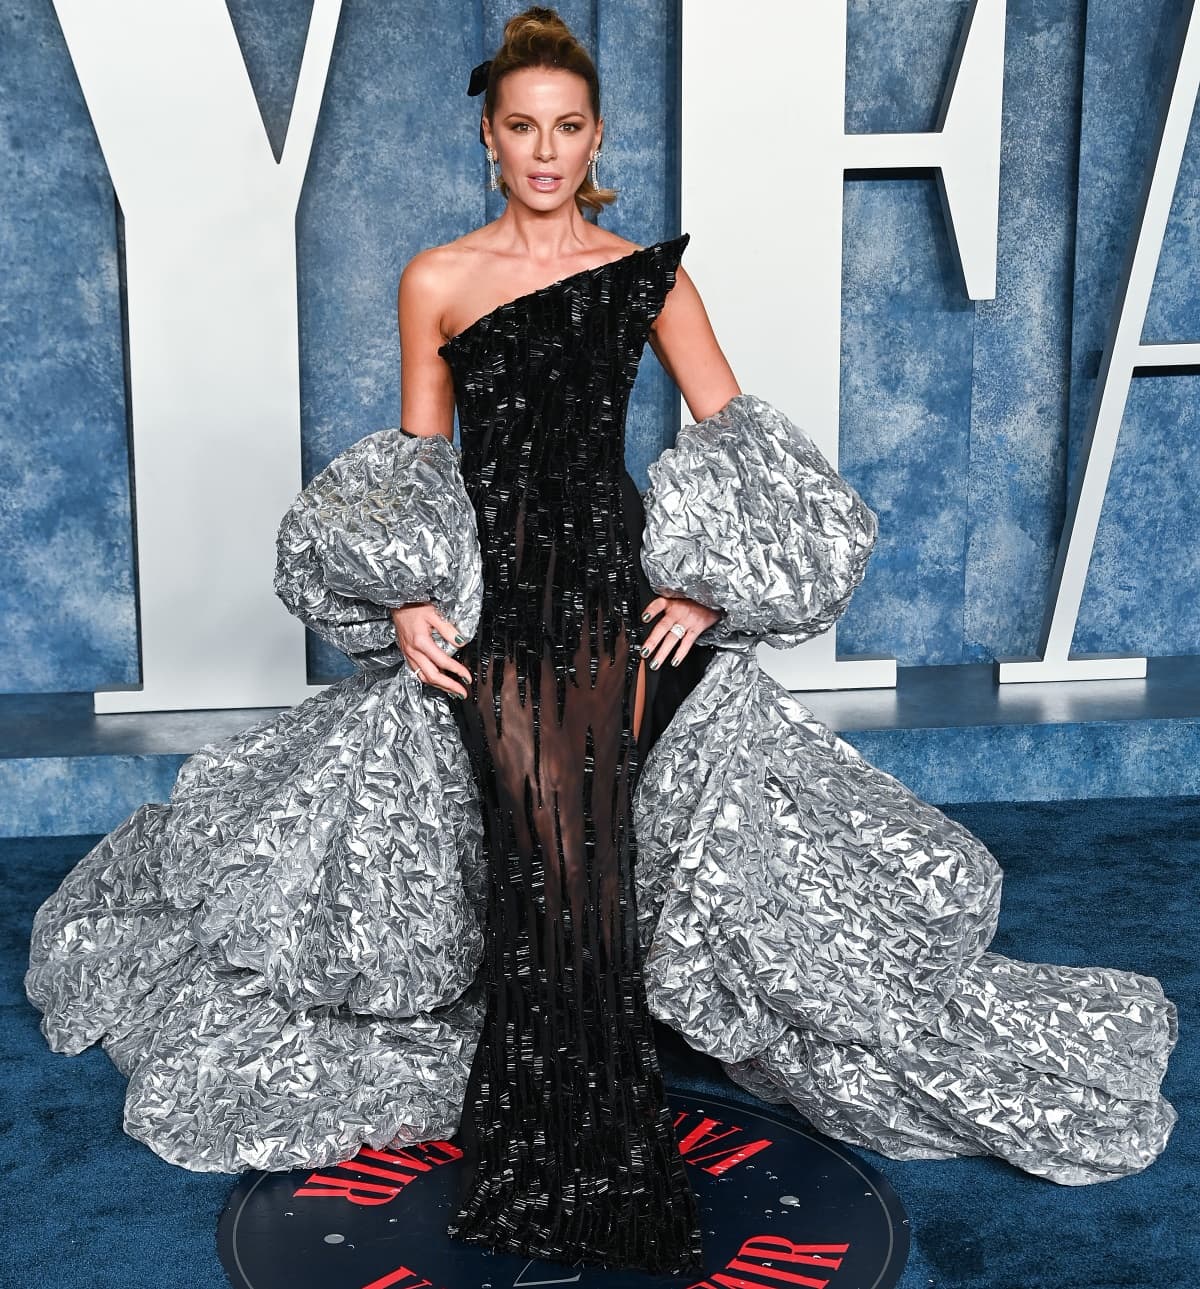 Kate Beckinsale looked stunning in her Tony Ward Couture gown at this year’s Vanity Fair Oscar Party